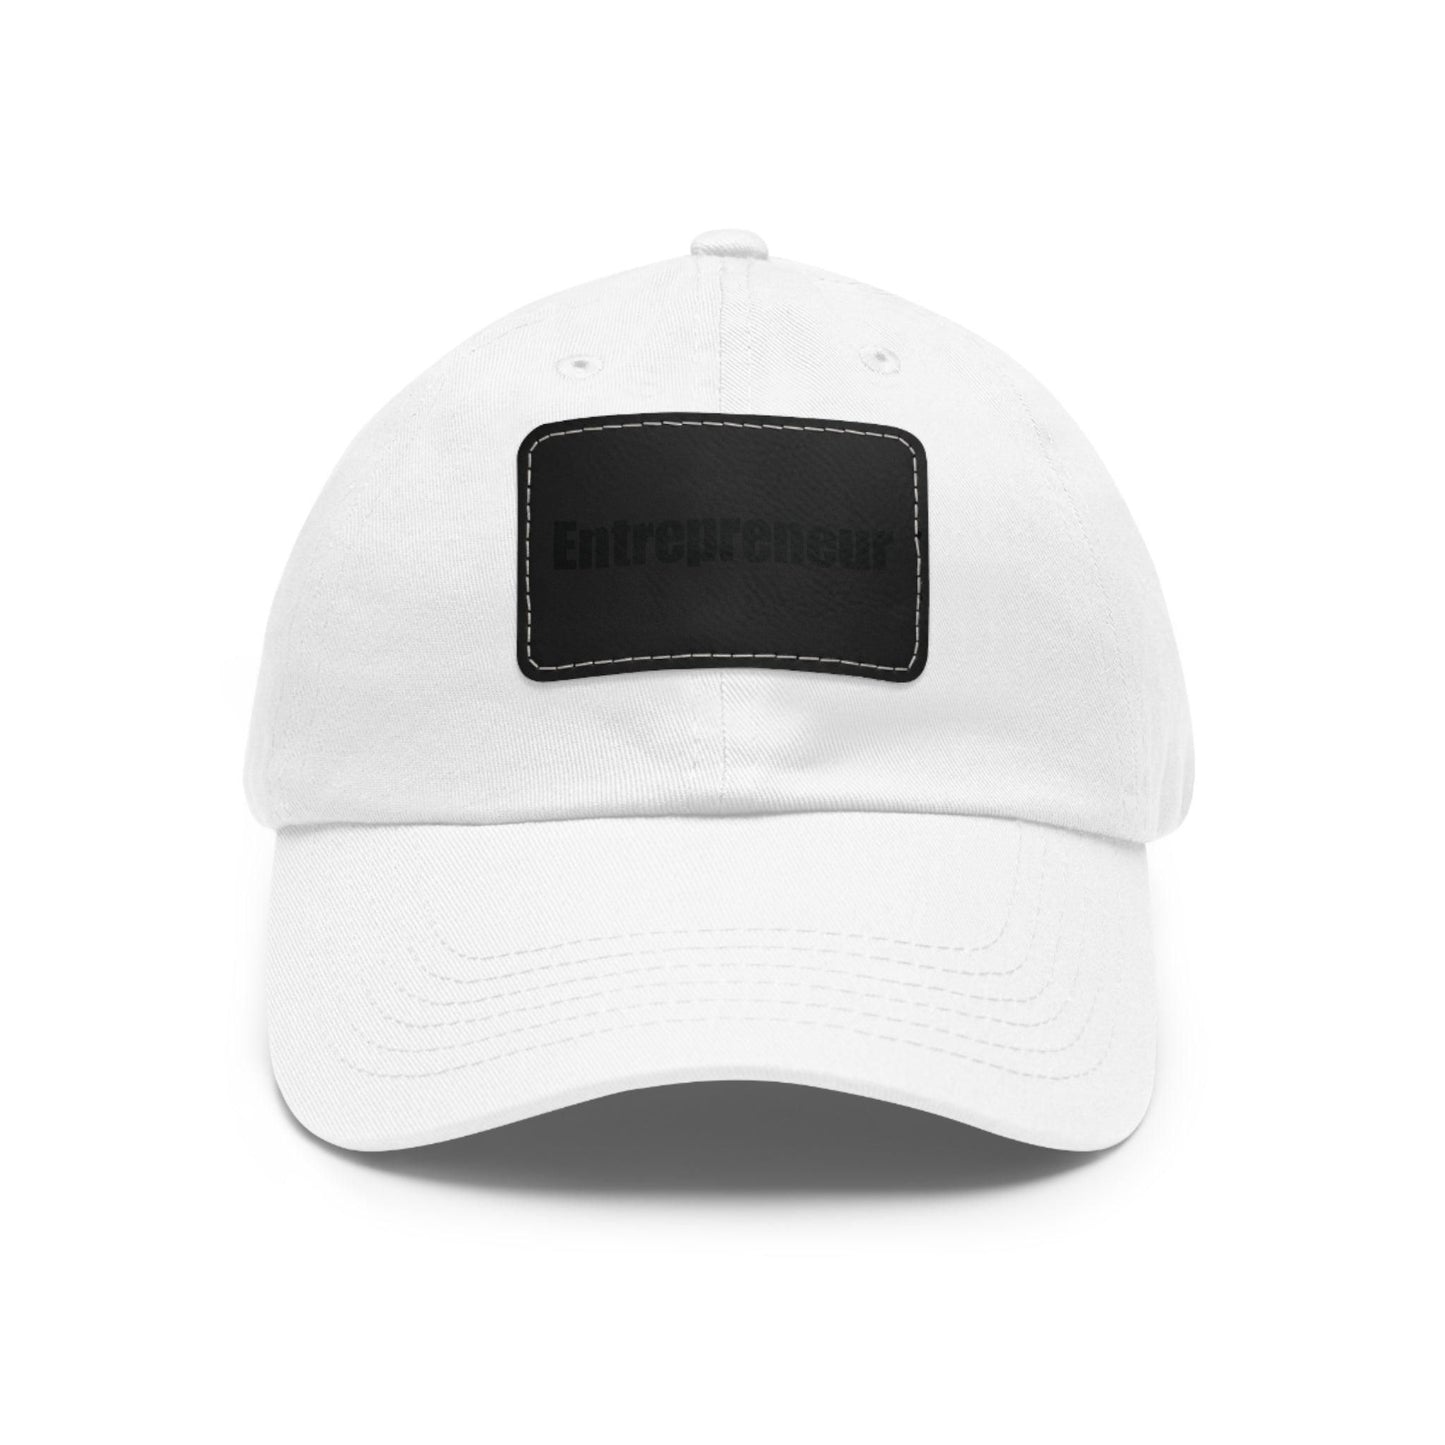 Entrepreneur Baseball Hat with Leather Patch Cap White / Black patch Rectangle One size